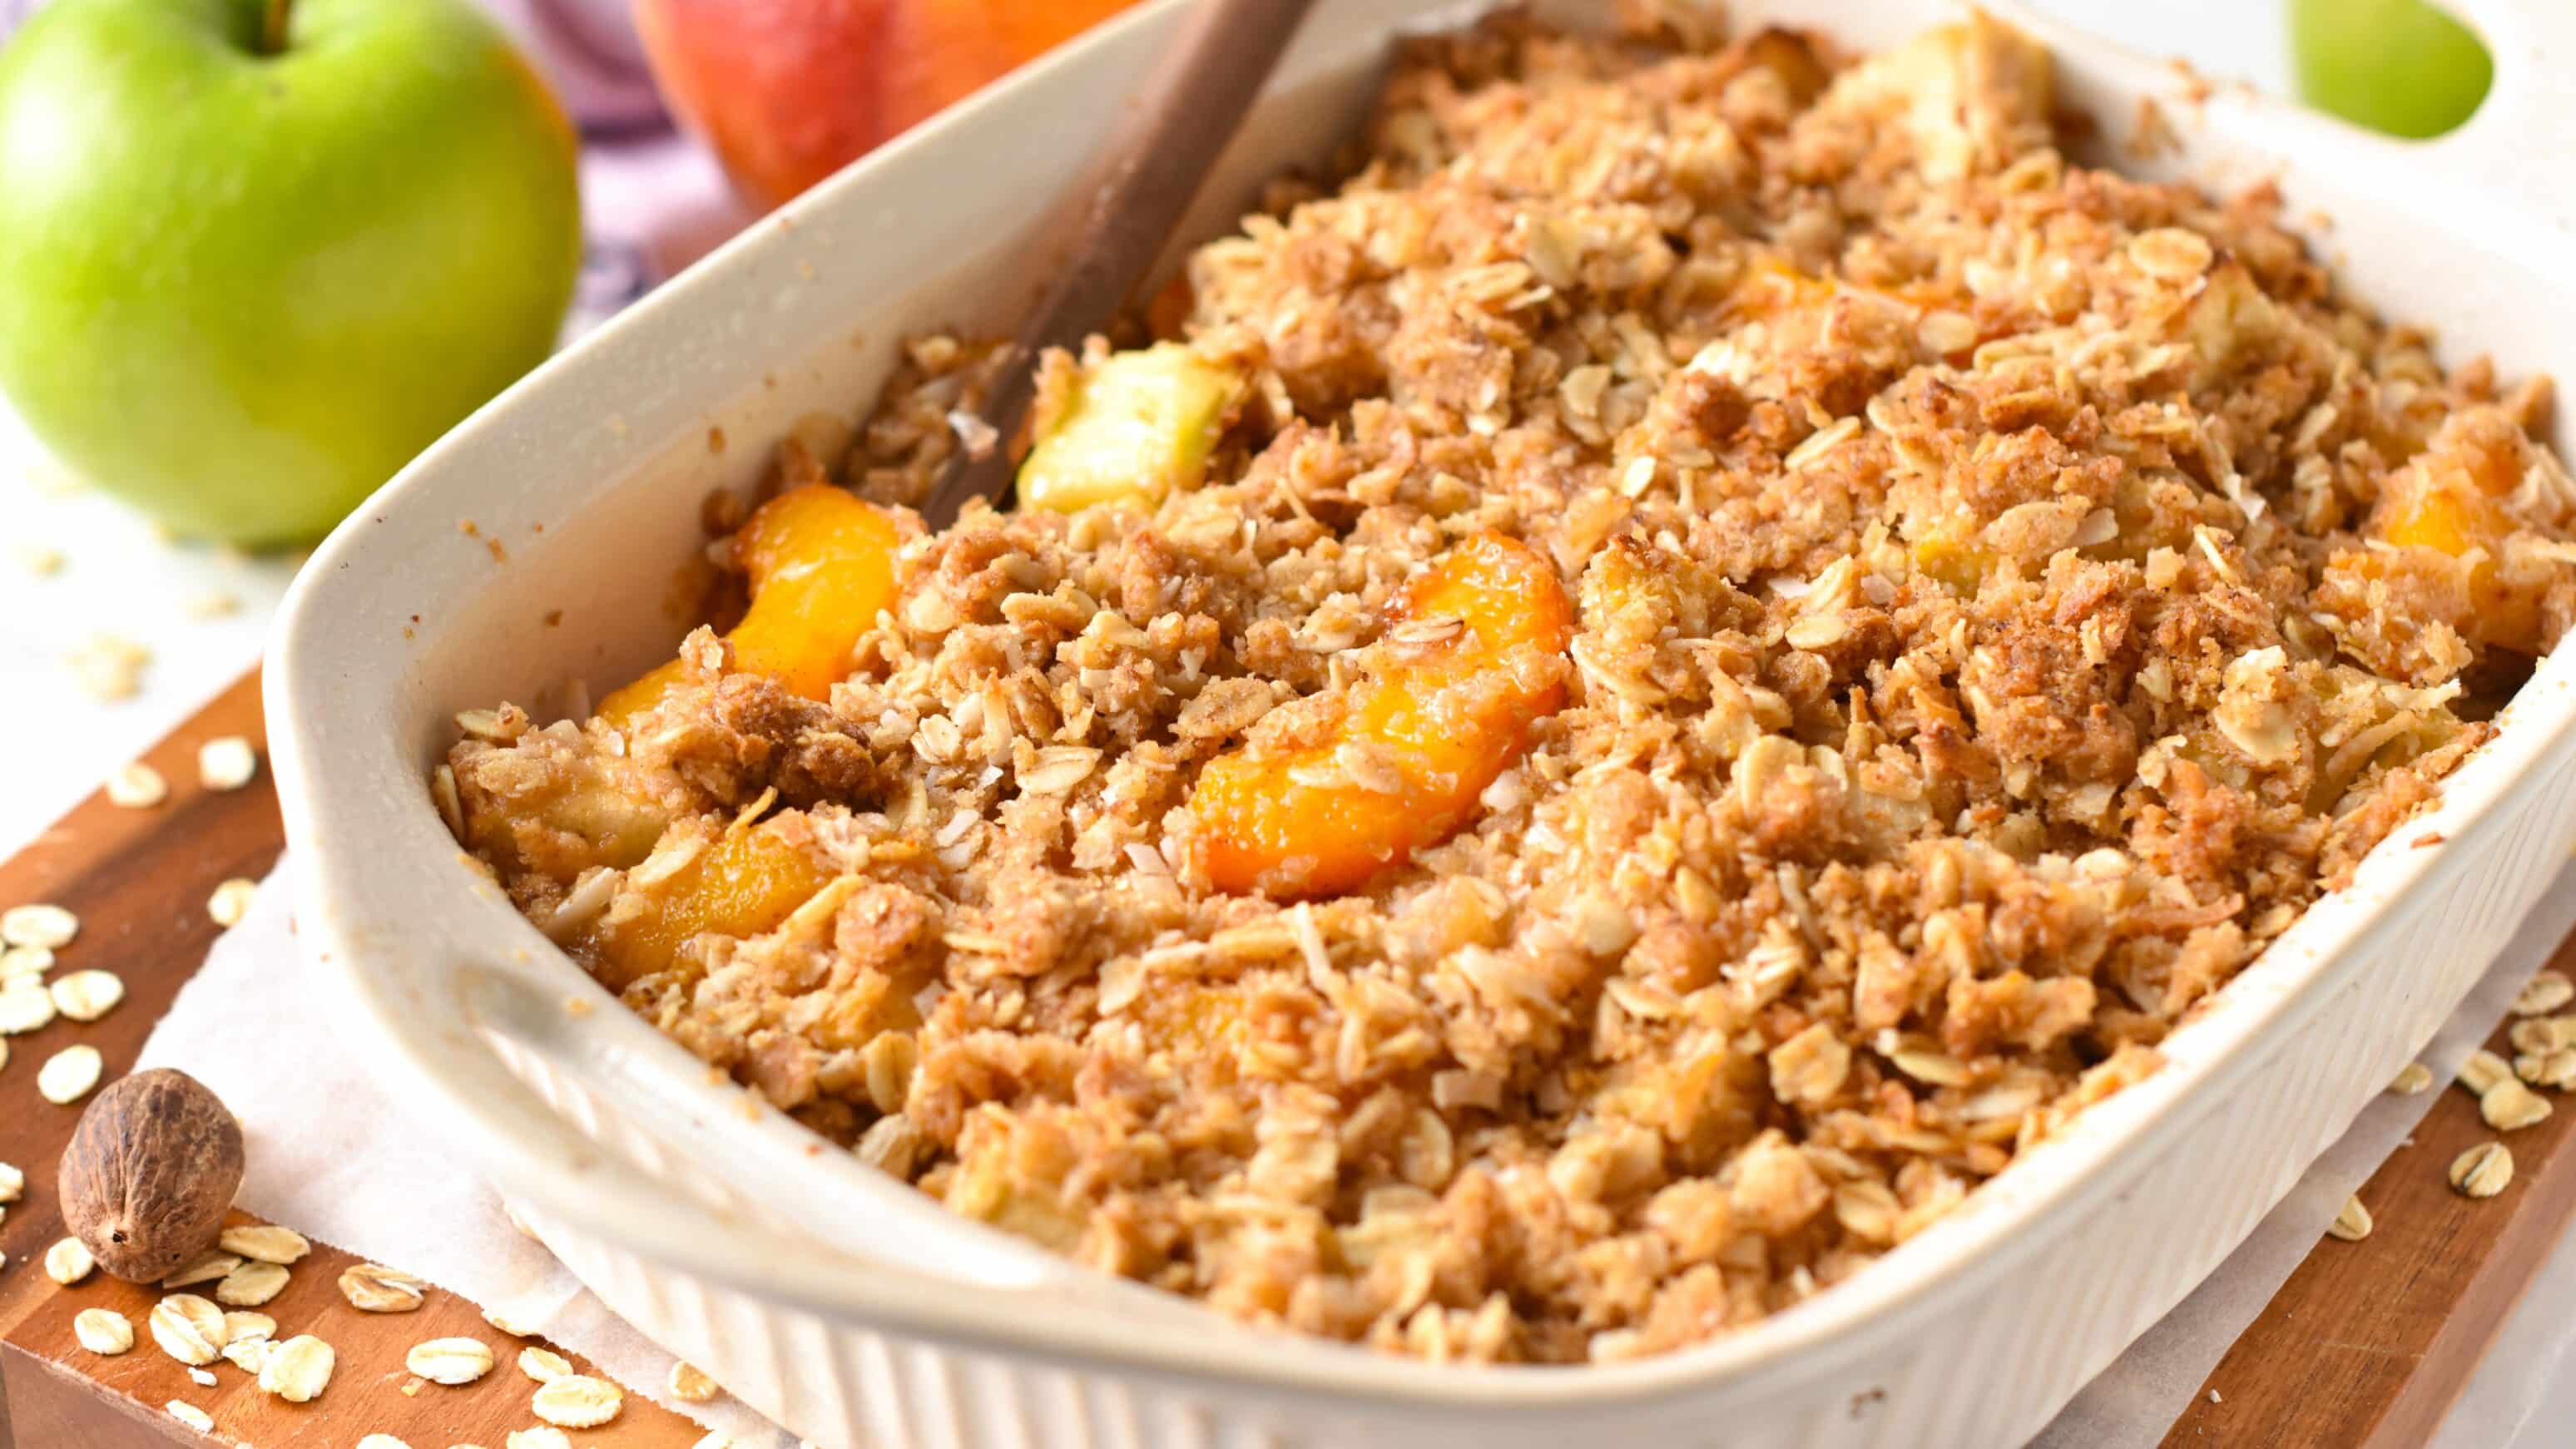 Apple and Peach Crumble in a ceramic pan